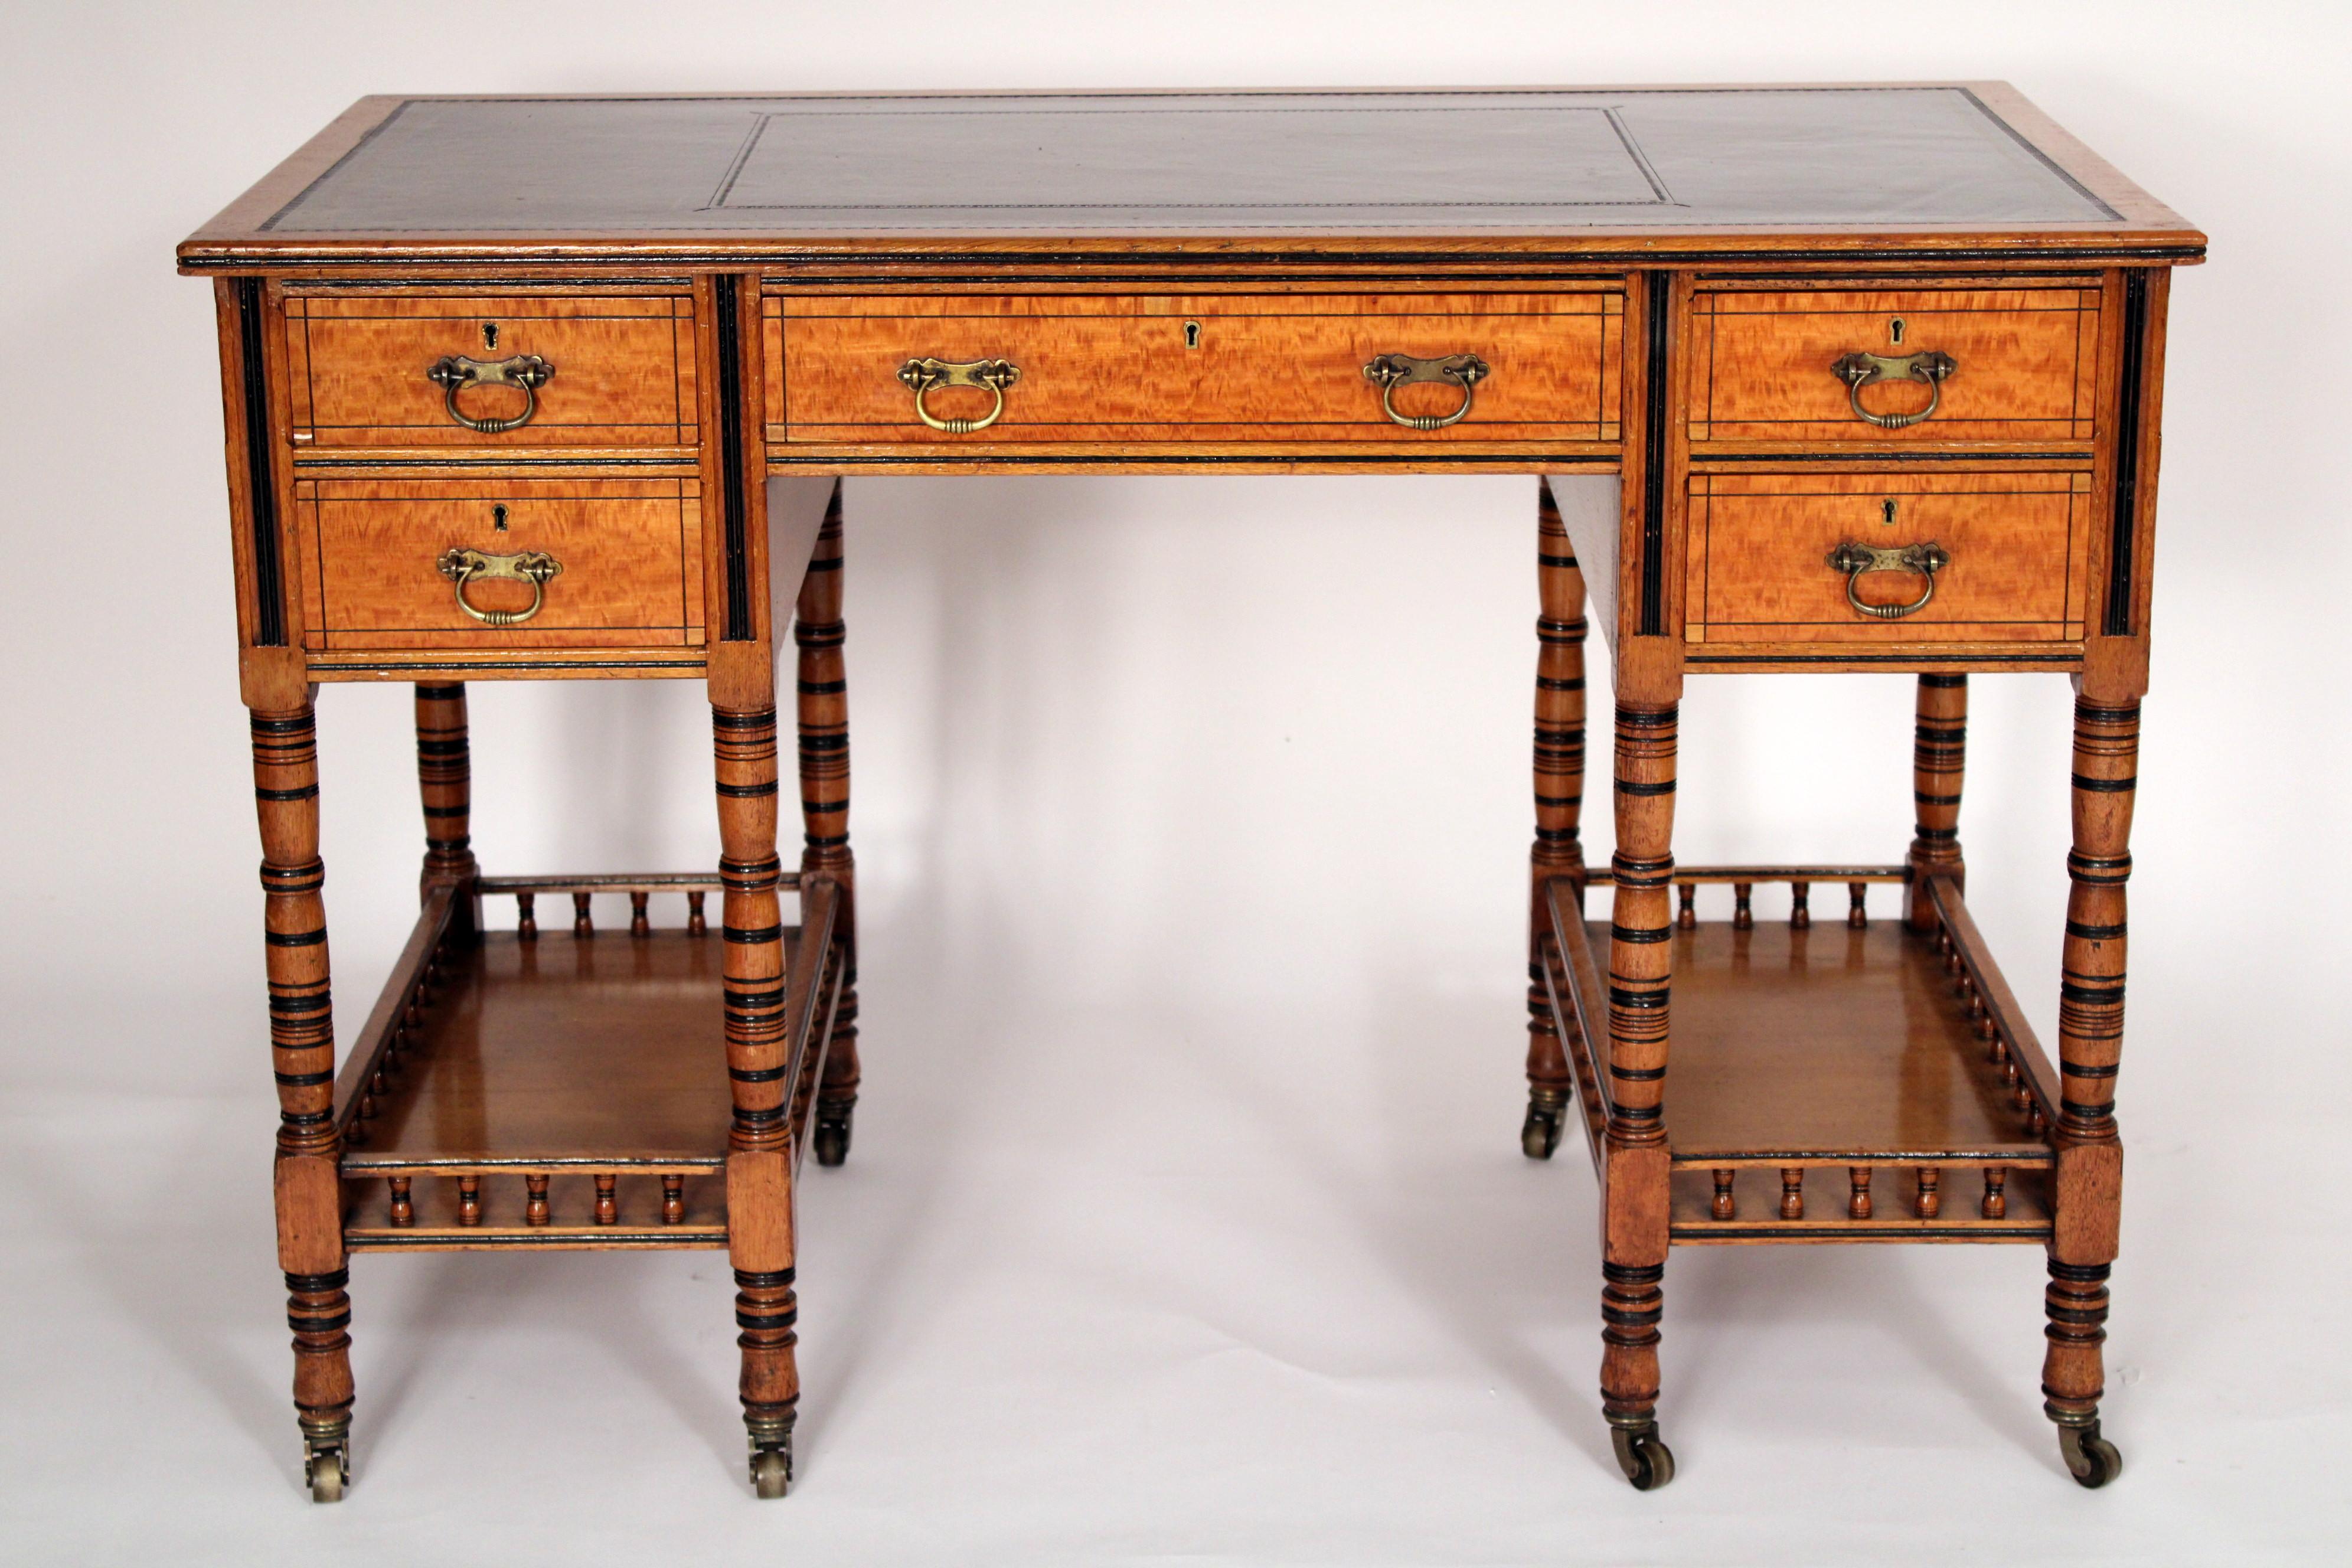 English aesthetic movement satinwood and oak desk with leather top, circa 1900. With a rectangular overhanging oak top inset with tooled leather, central satinwood drawer flanked on either side by two satin wood drawers, satin wood paneled back,